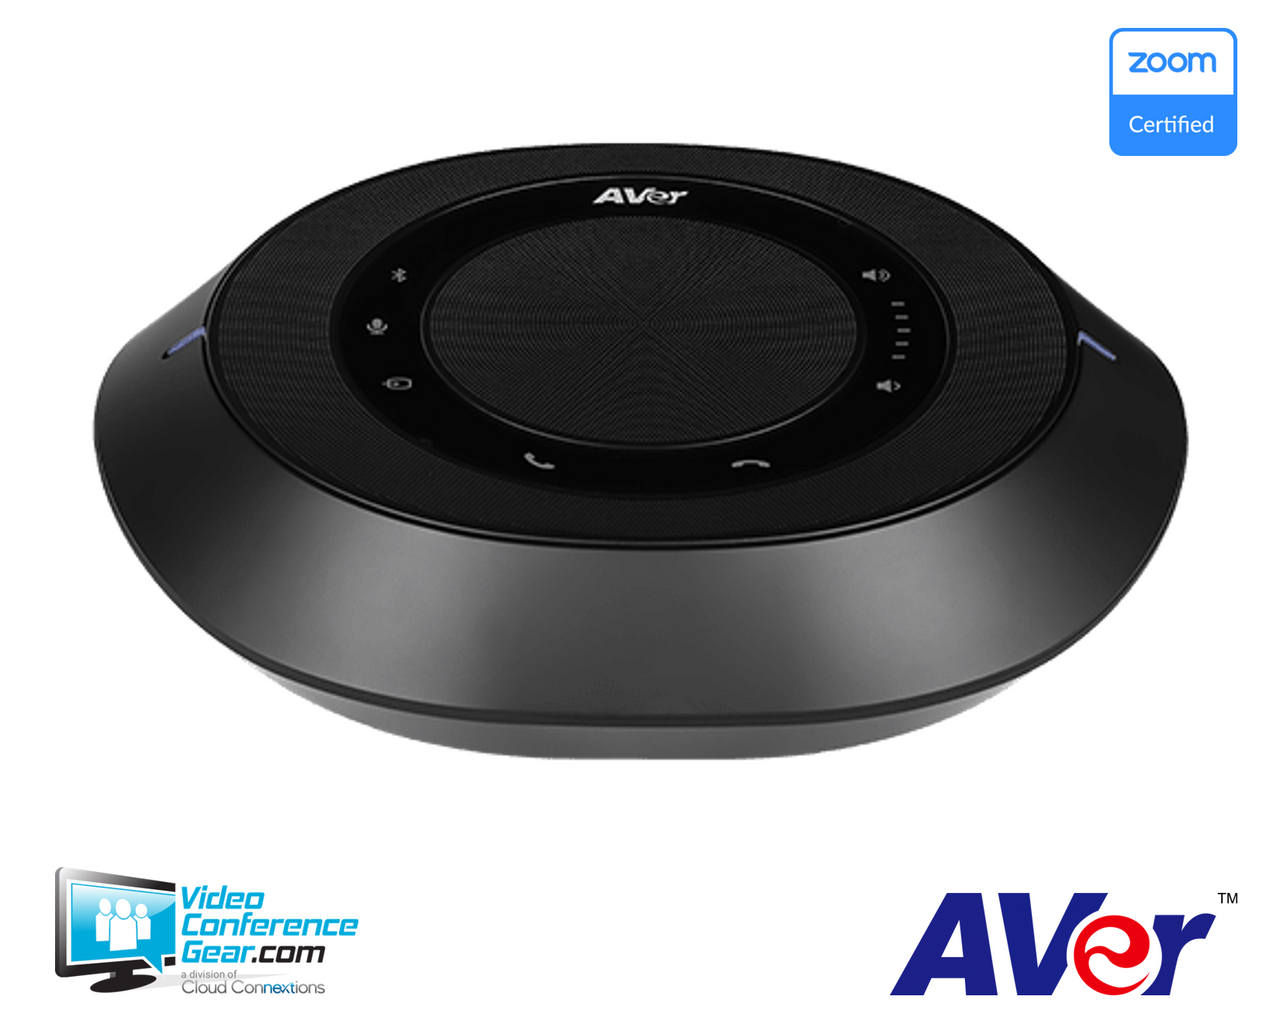 AVer FONE540 Speakerphone for Medium and Large Rooms Zoom Certified